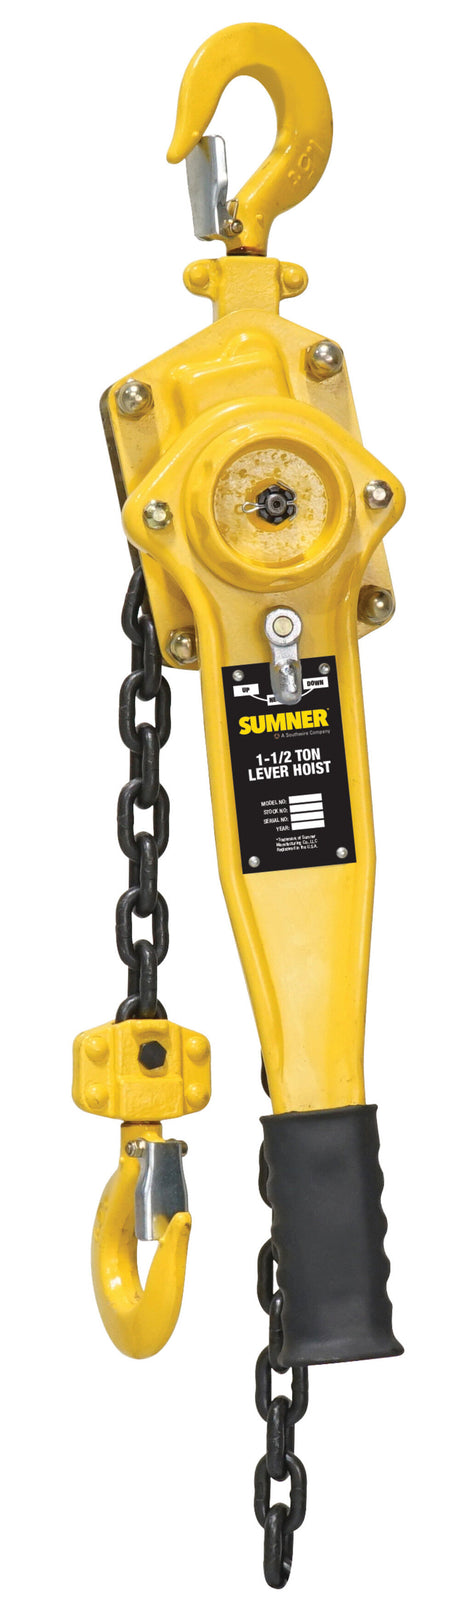 1-1/2 Ton Lever Hoist with 20 ft. Chain Fall 787549